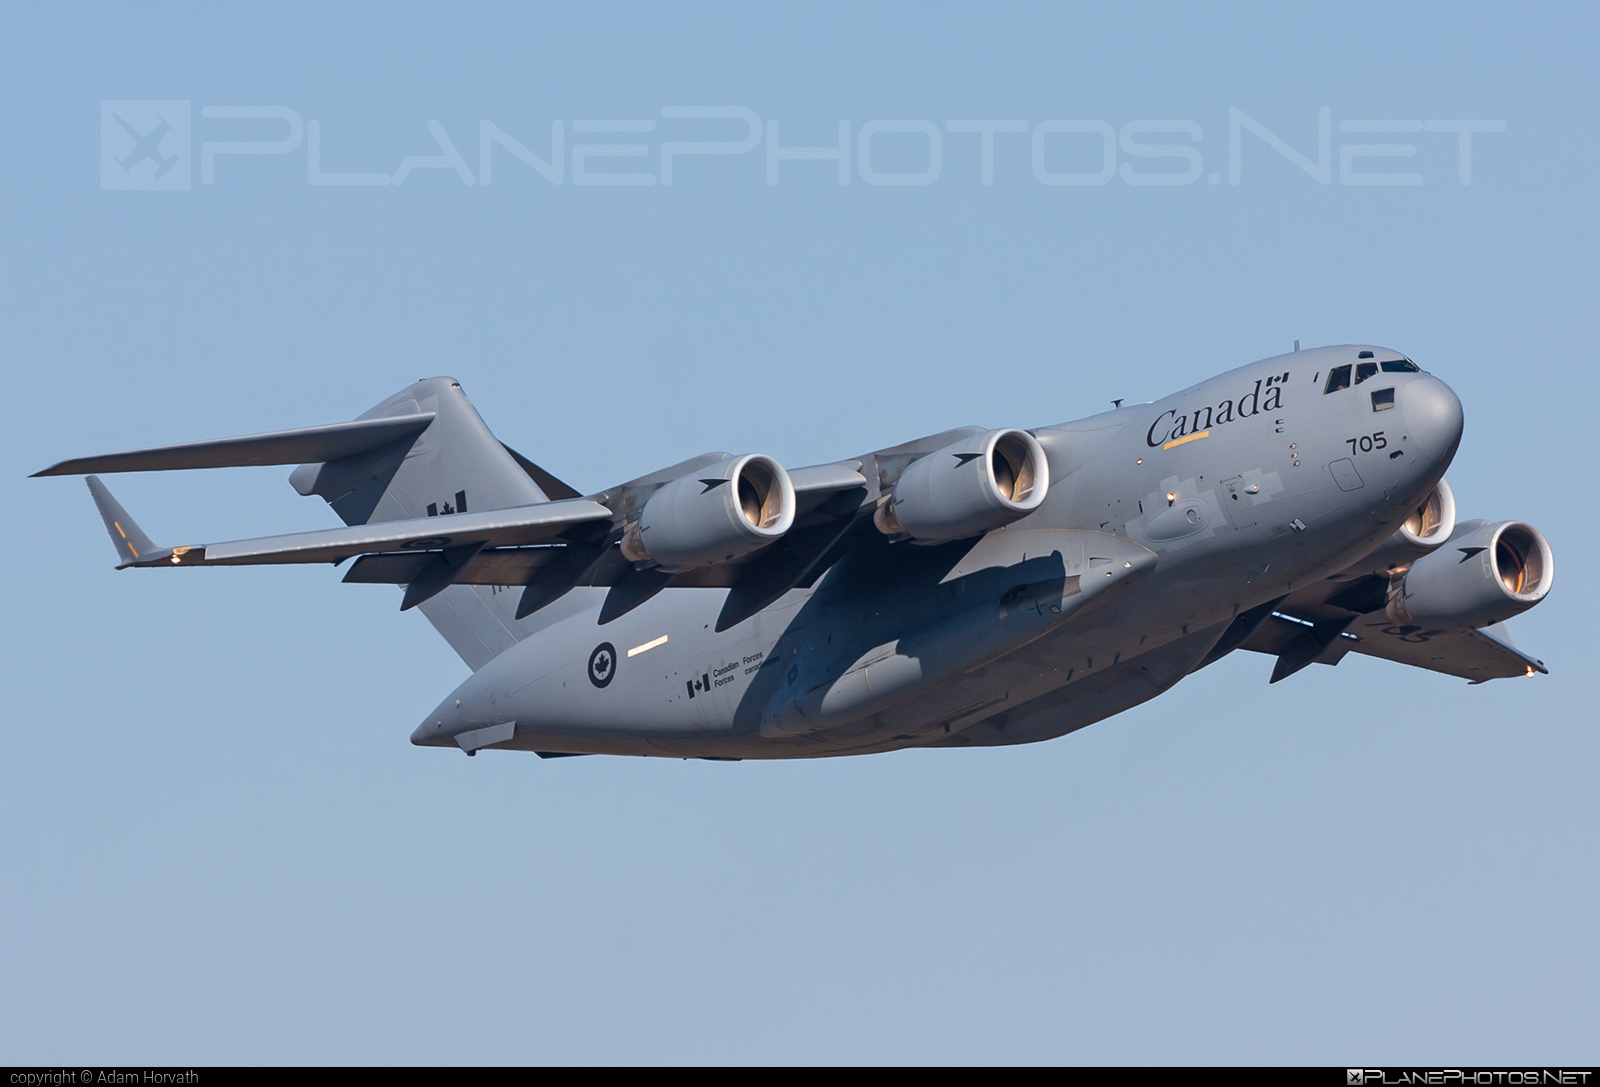 Boeing CC-177 Globemaster III - 177705 operated by Canadian Armed Forces #boeing #c17 #c17globemaster #cc177 #cc177globemaster #globemaster #globemasteriii